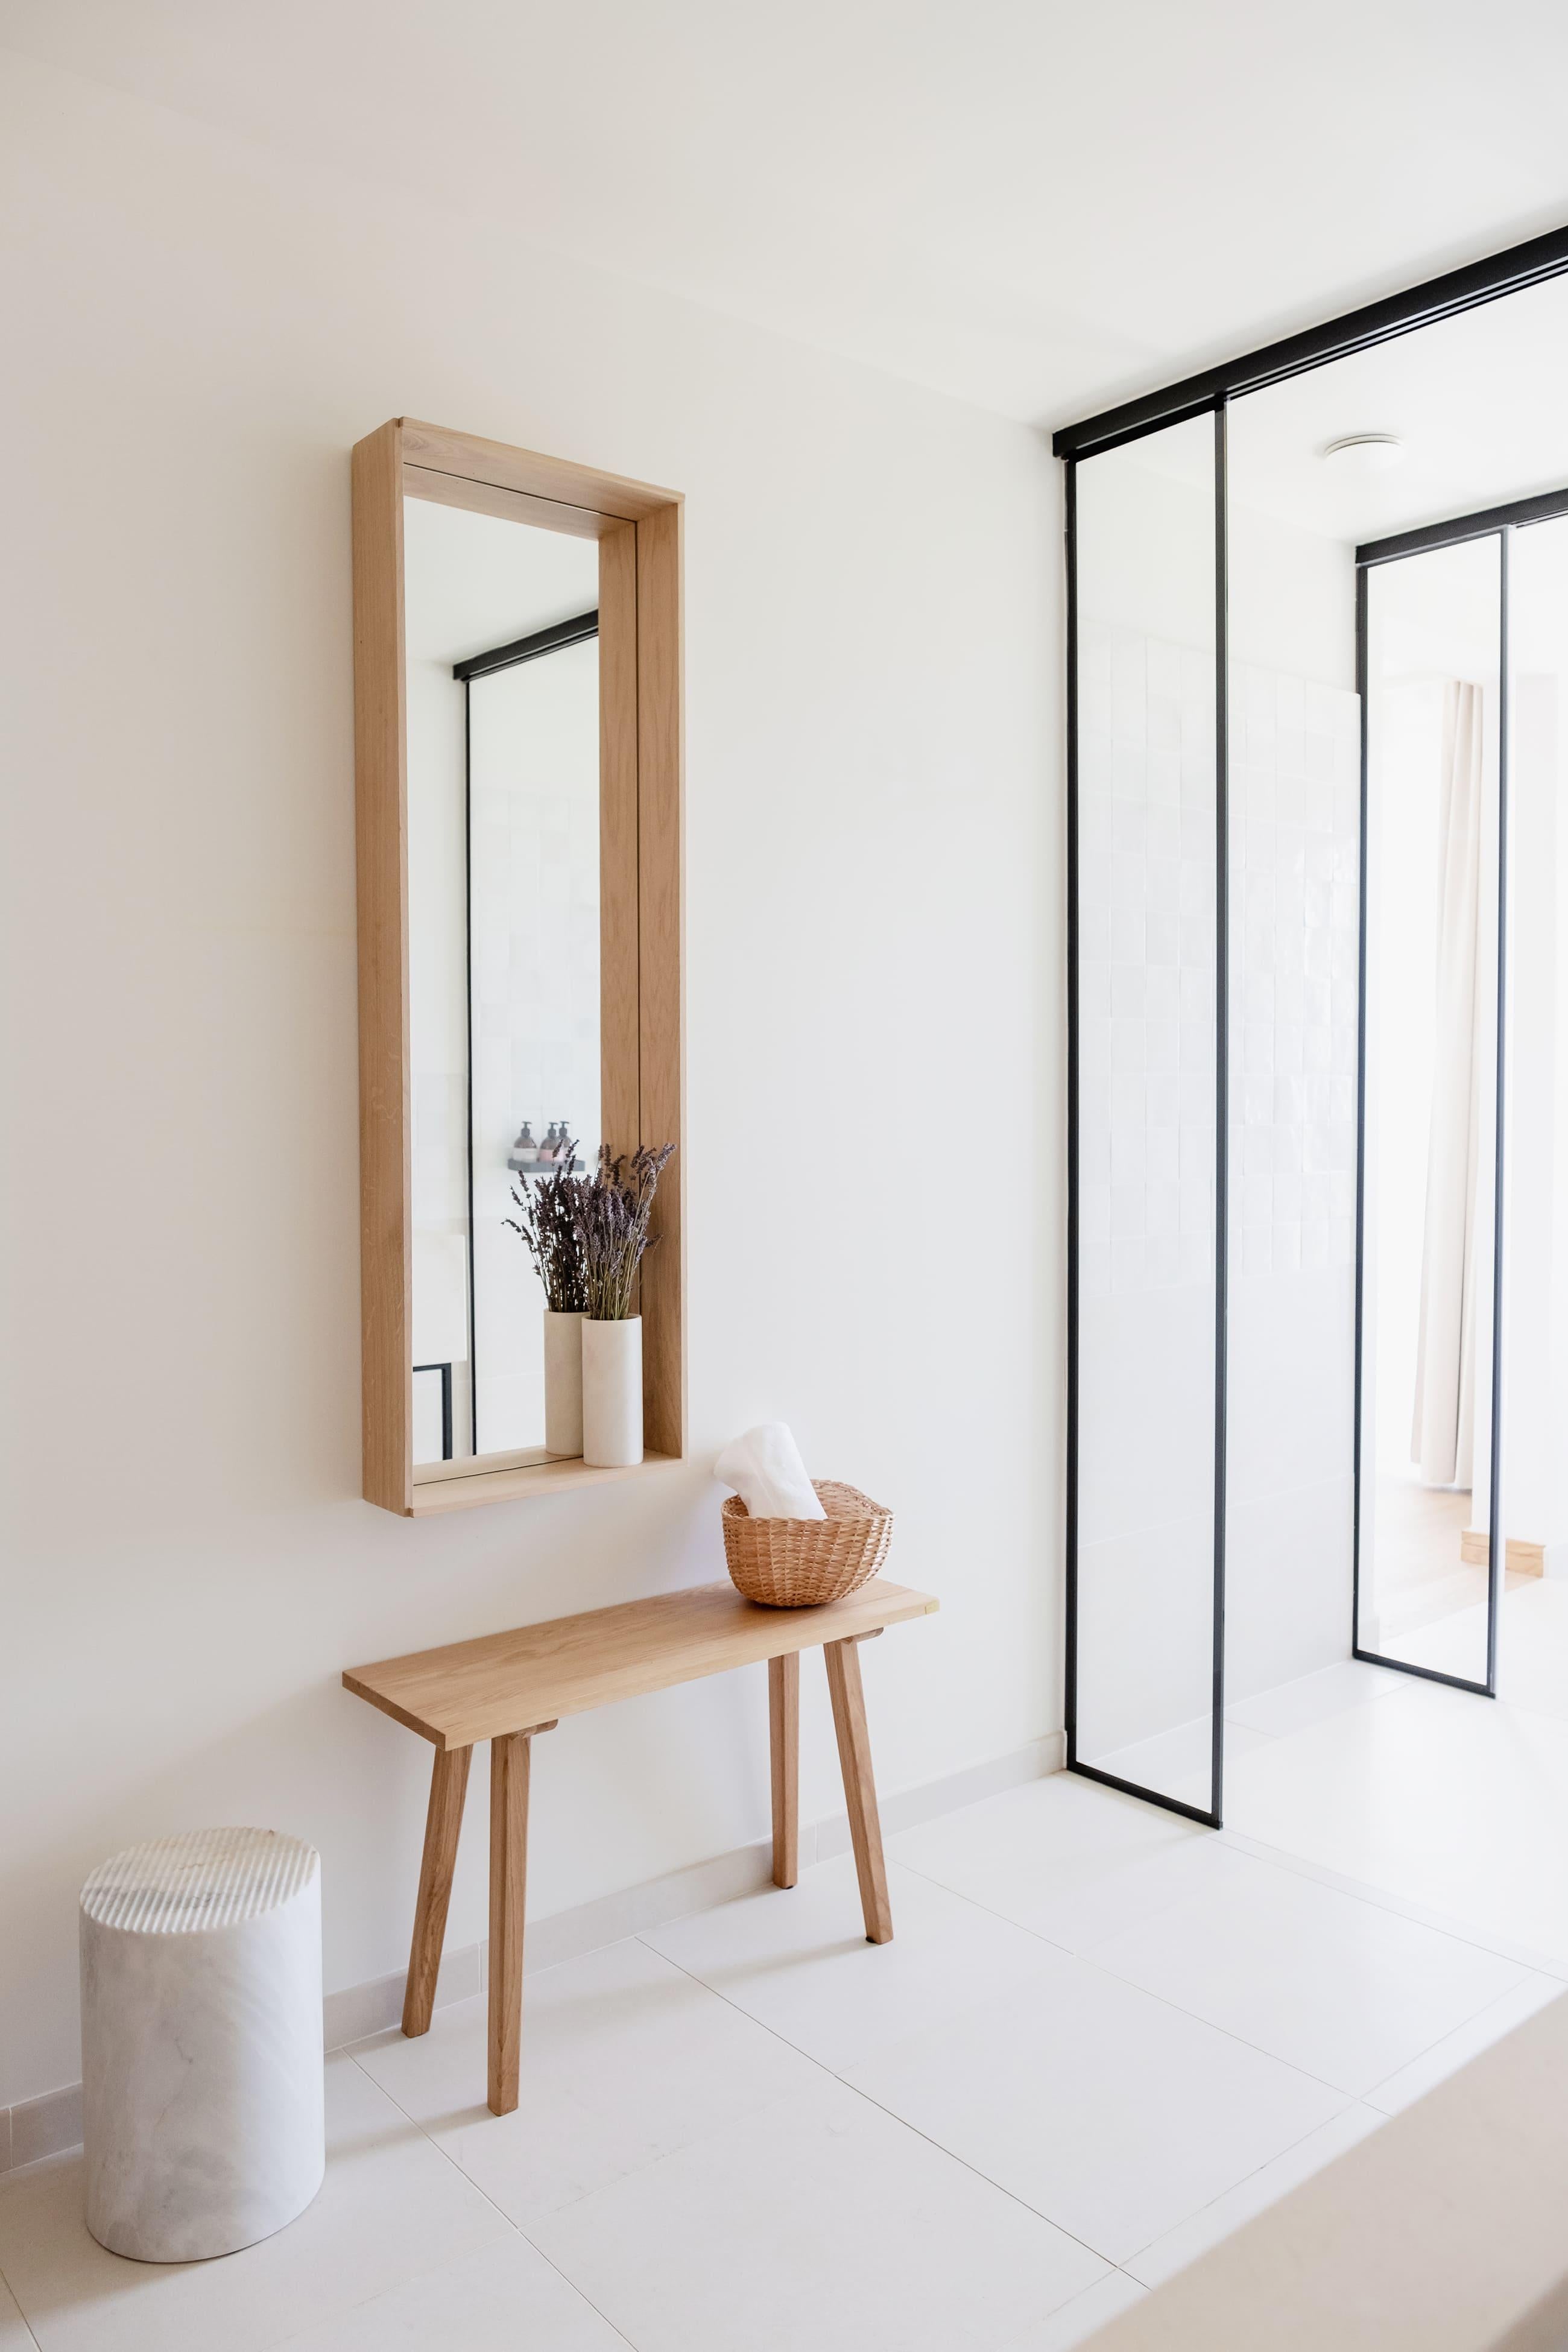 Campo is a multipurpose mirror that opens a window to simple times. A minimal and honest design that offers a variety of uses.

Inspired by traditional wooden cases used in the markets during the early 50’s, CAMPO mirror replicates the functionality